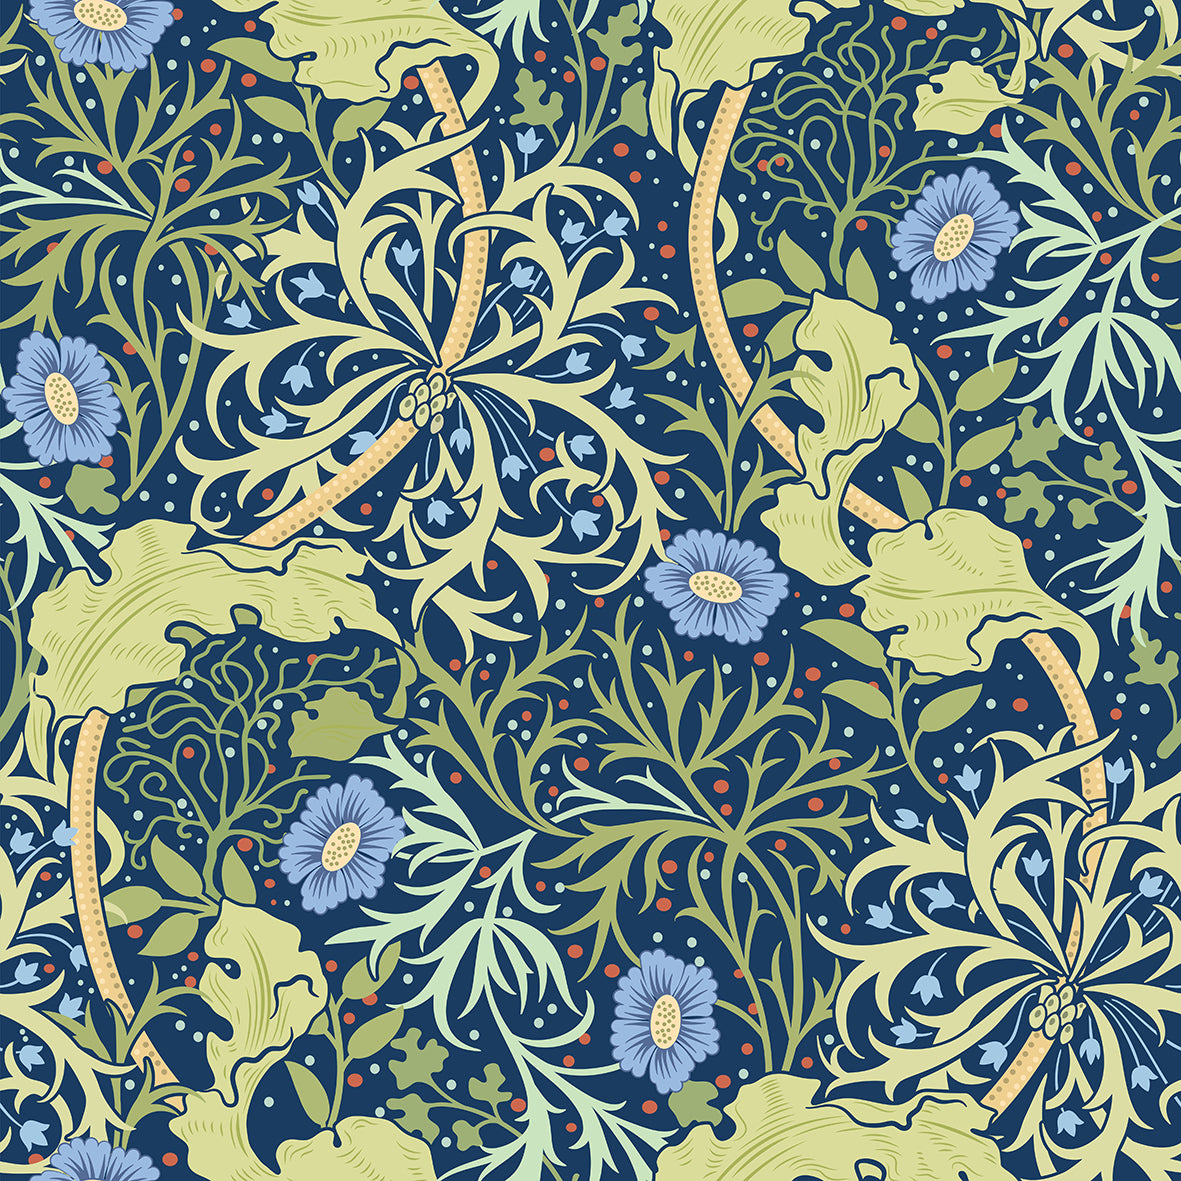 william-morris-co-heavy-duty-floor-mat-seaweed-collection-blue-flowers-2